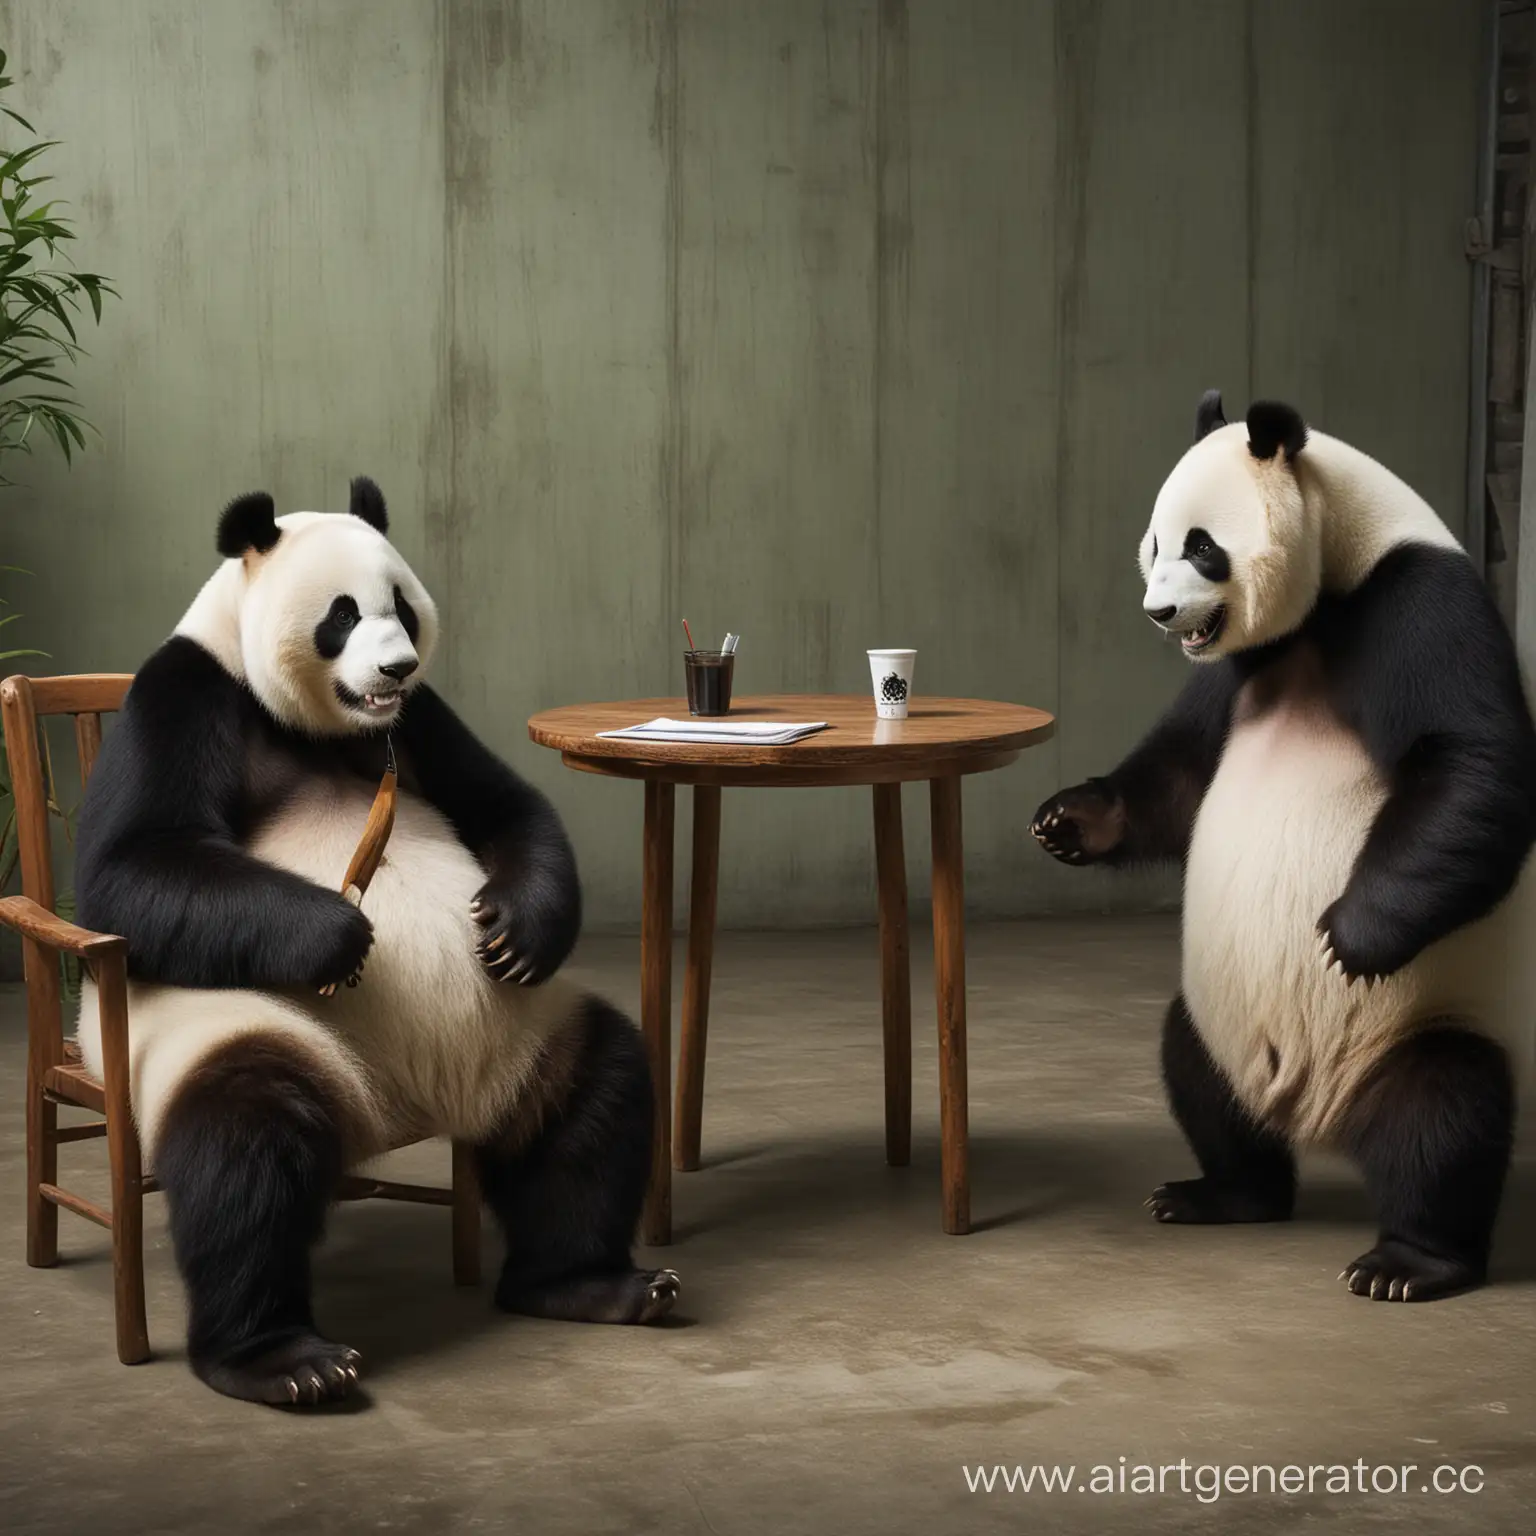 Panda-Conducts-Job-Interview-in-Busy-Panda-Company-Office